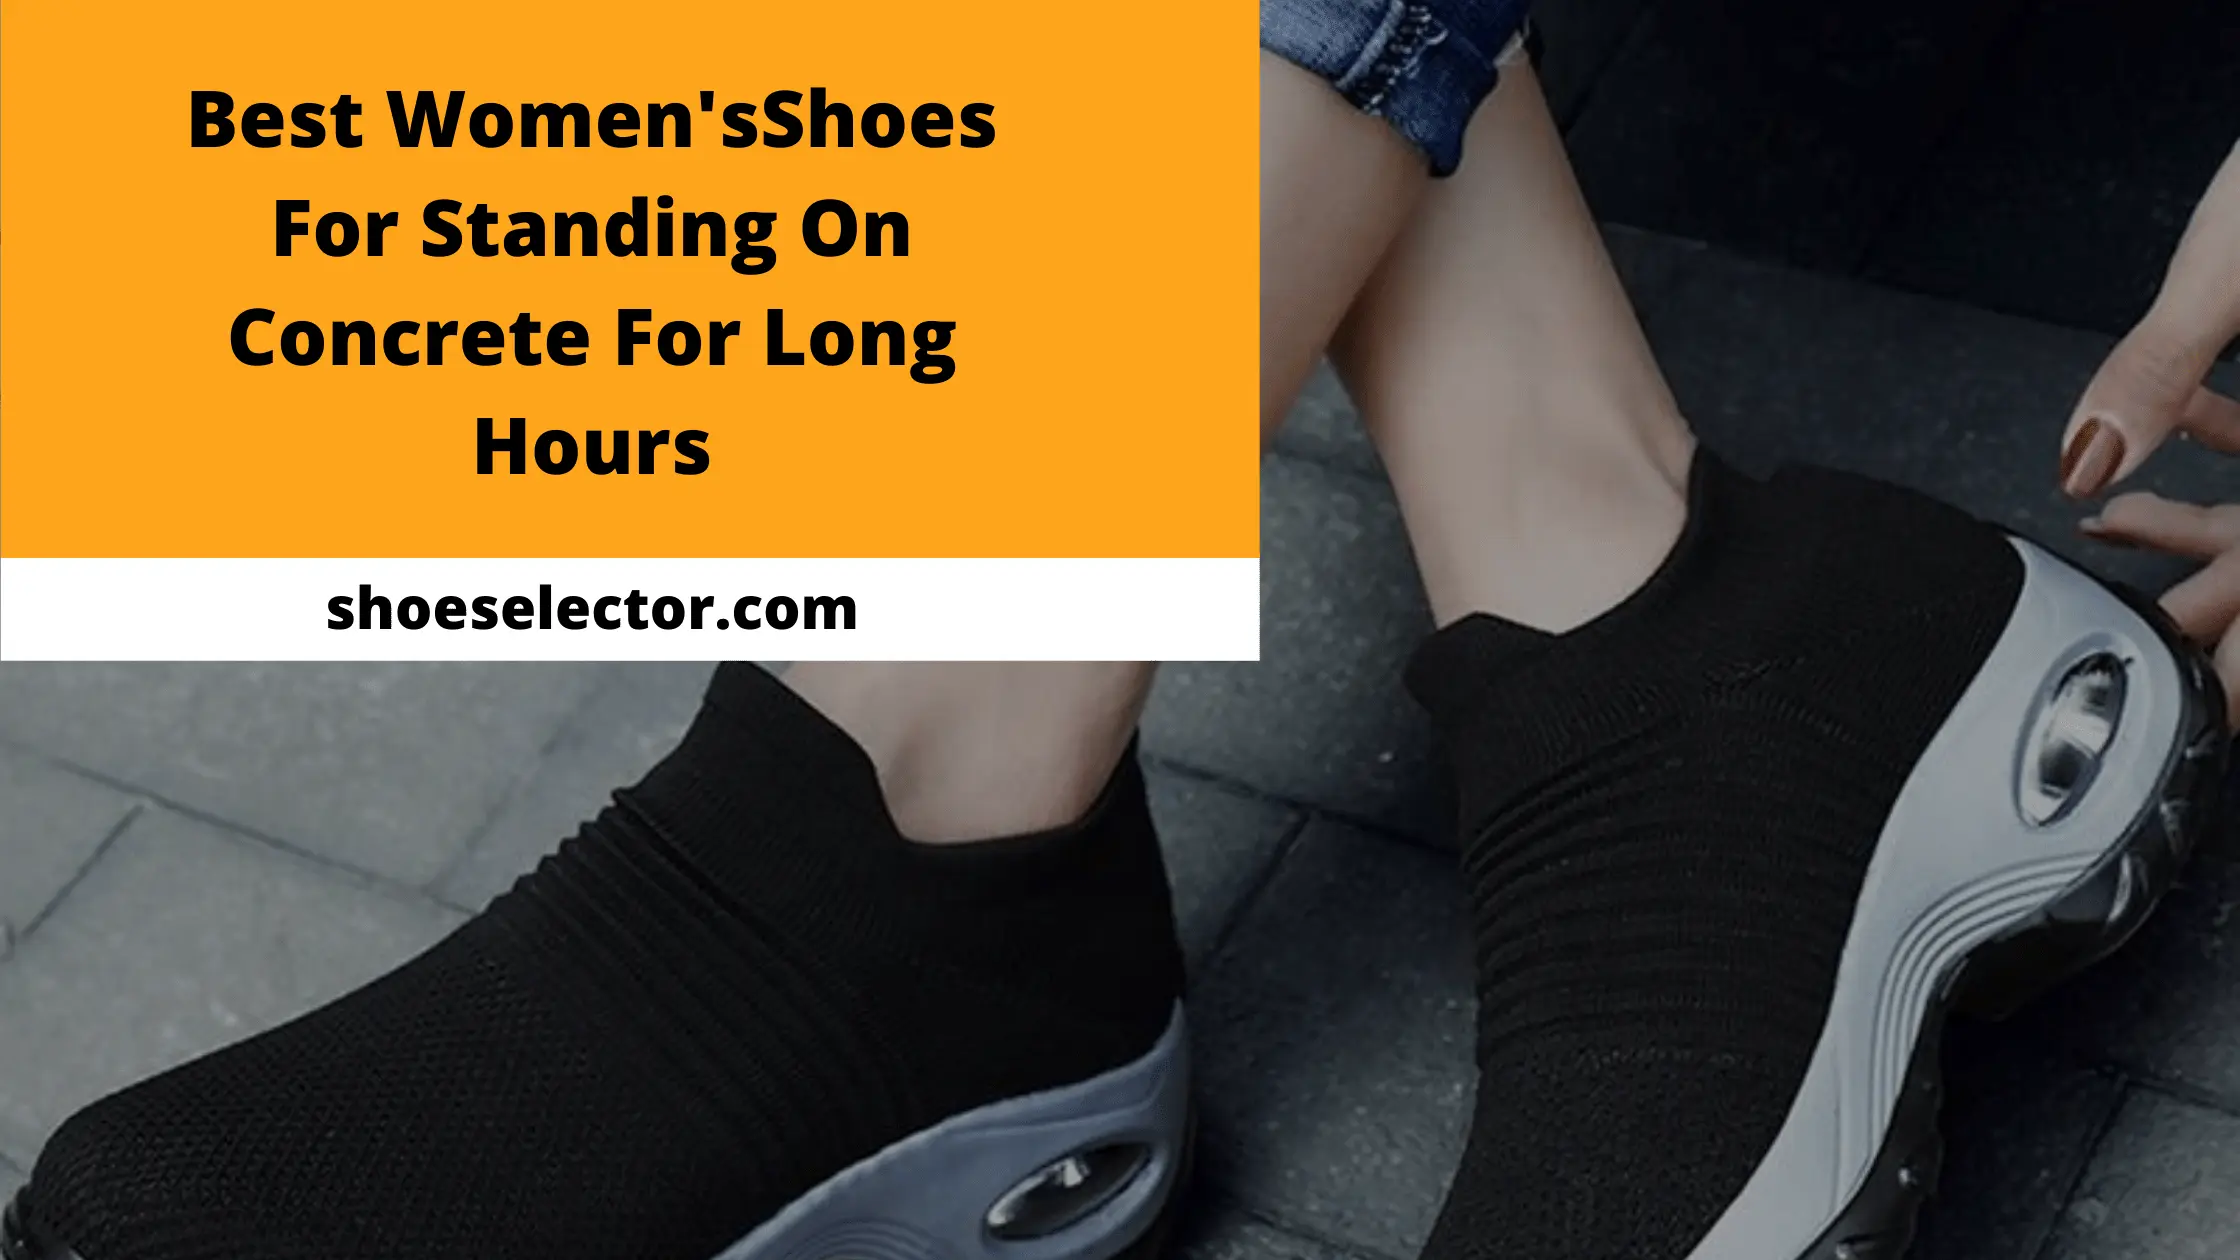 Best Women's Shoes For Standing on Concrete For Long Hours